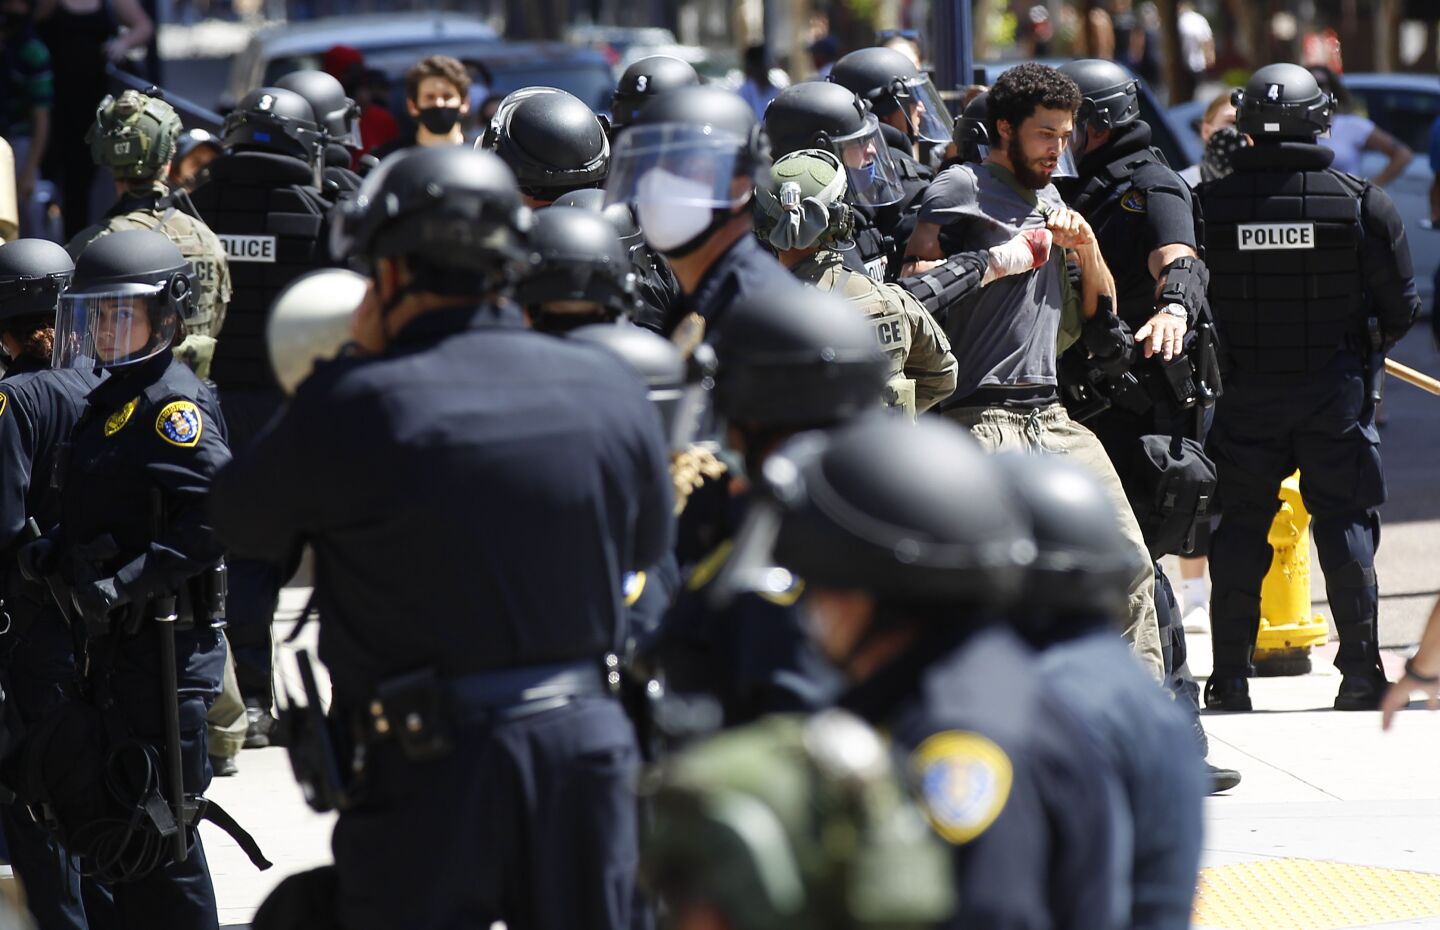 A protester is taken into custody by San Diego police in downtown San Diego on May 31, 2020. The group was protesting the death of George Floyd.